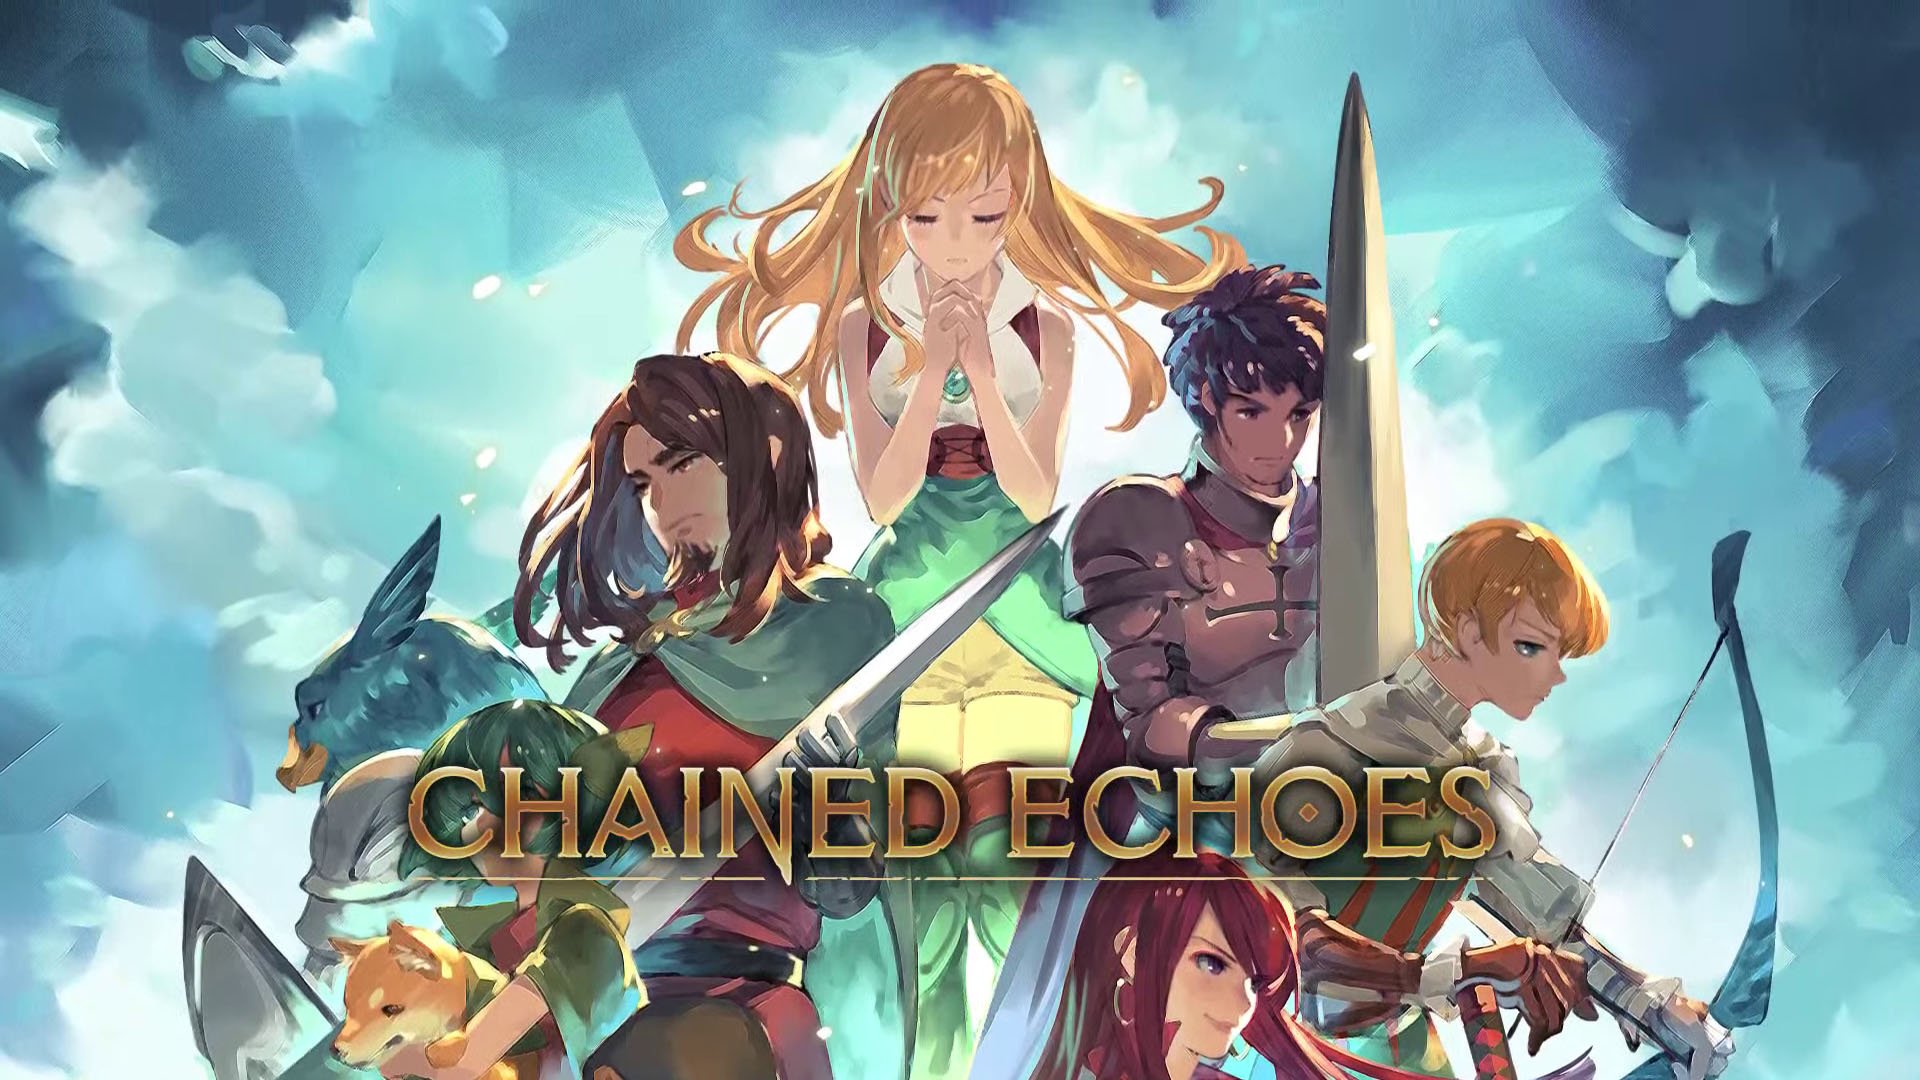 Kickstarter Backed Game Chained Echoes Gets a Release Date – The Boss Rush  Network